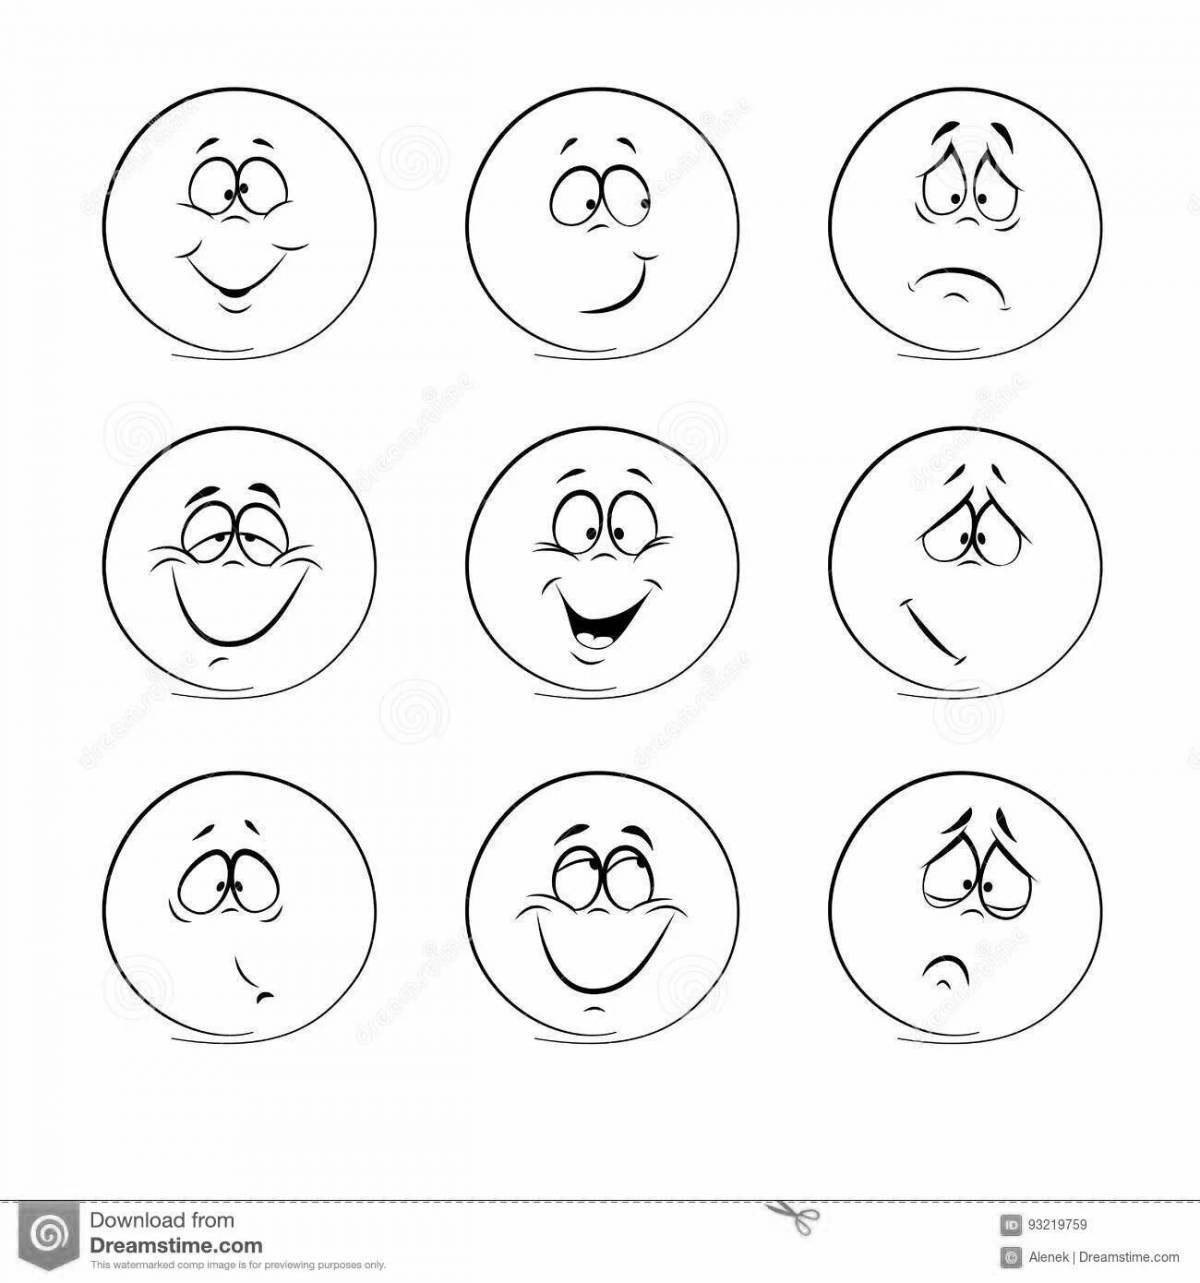 Coloring page of the glowing emoticon